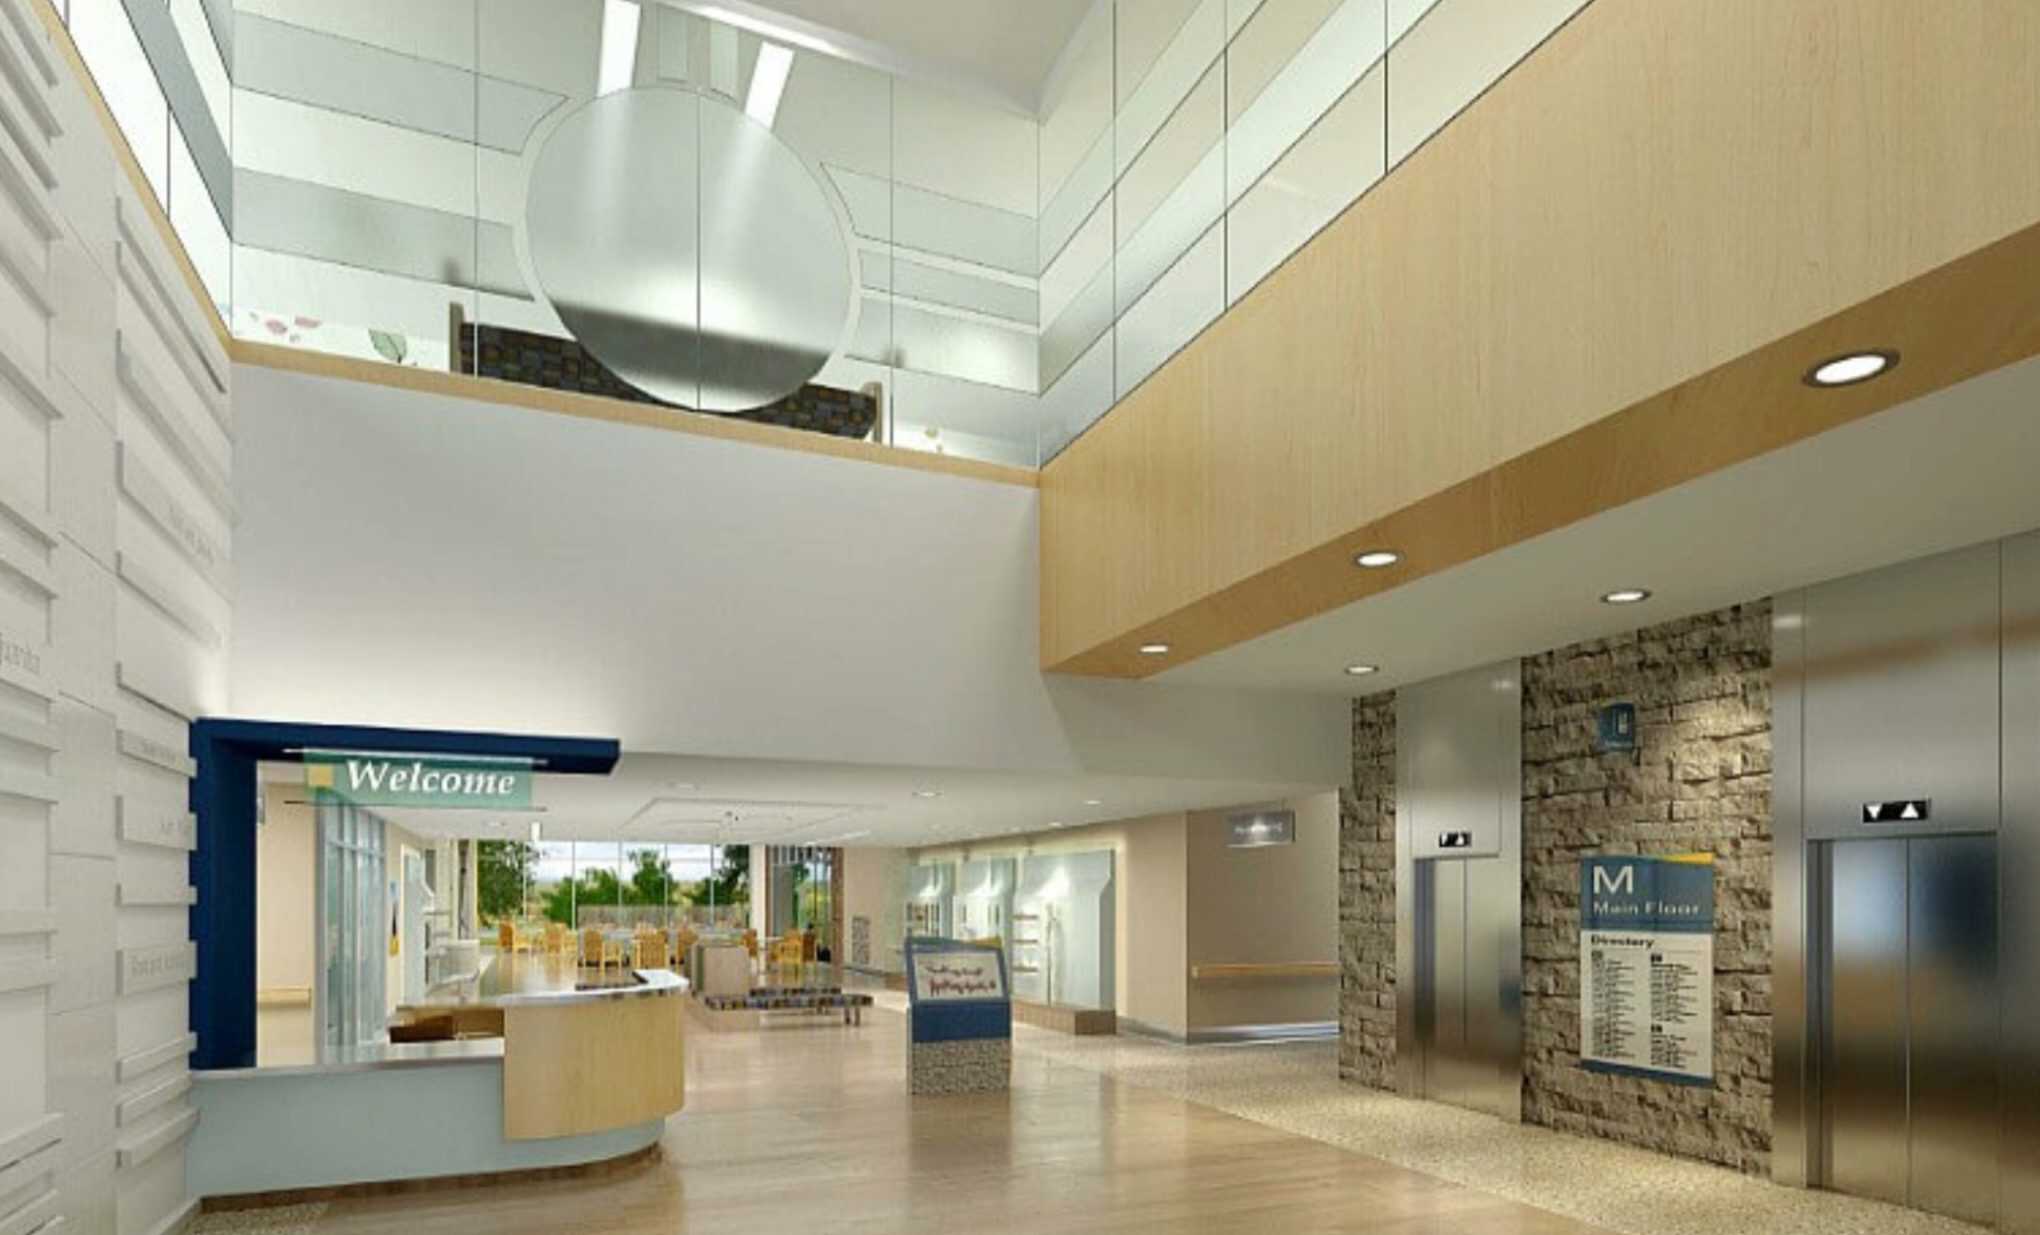 Saskatchewan Hospital, North Battleford. BAP Acoustics worked with Access Prairies Partnership – the consortium comprising Graham Design Builders and Carillion Canada – to provide acoustic design advice to the team lead by Kasian Architecture and WSP Canada.